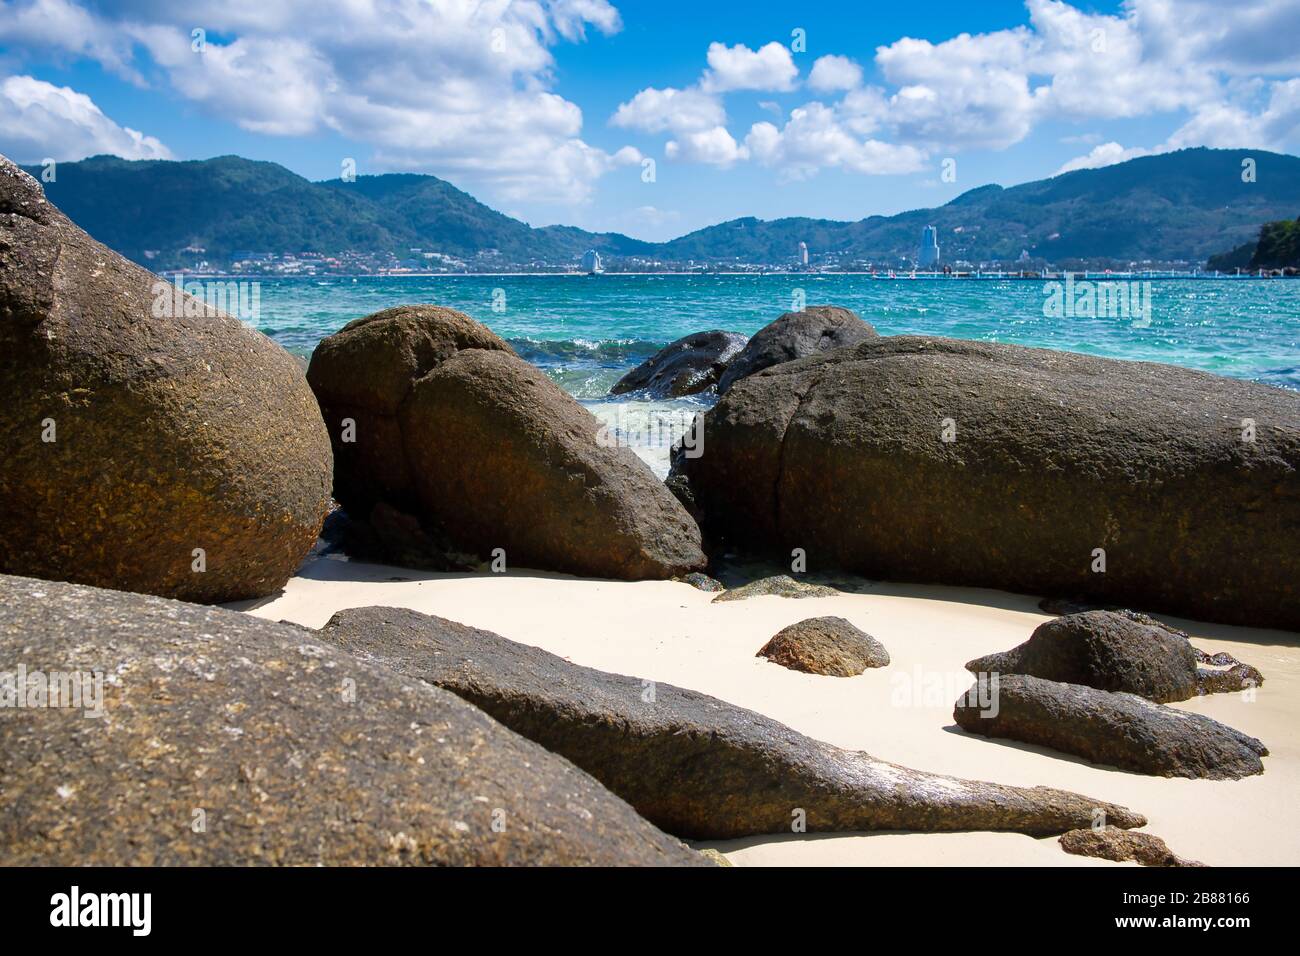 Paradise beach and turquoise sea in Phuket, Thailand. Summer vacation and tropical beach concept. Stock Photo